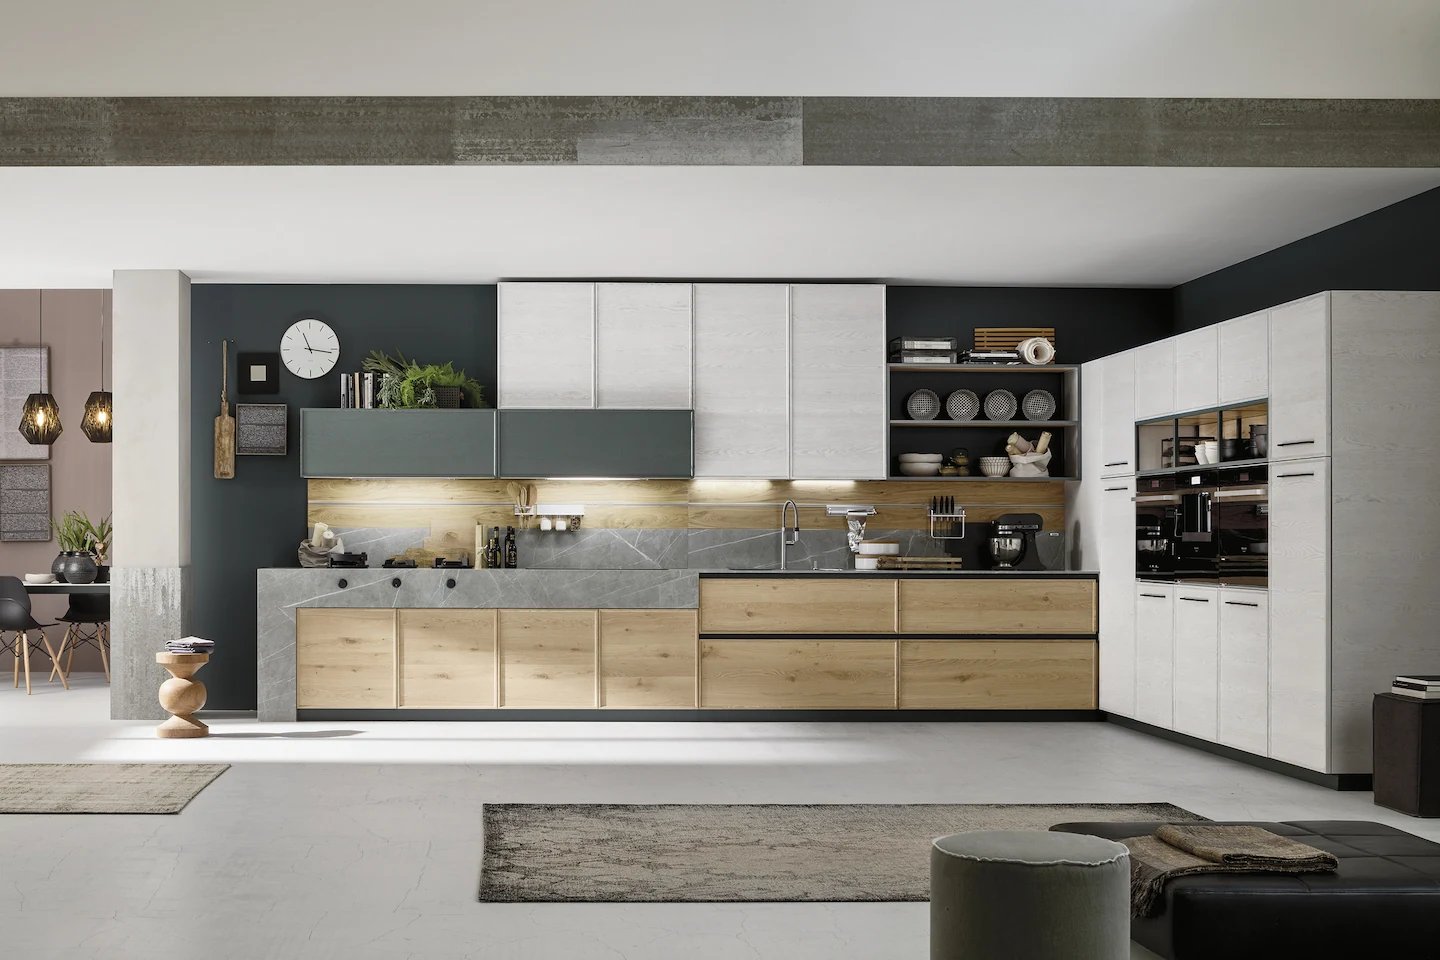 Italian kitchen cabinetry with mixed colors and textures.